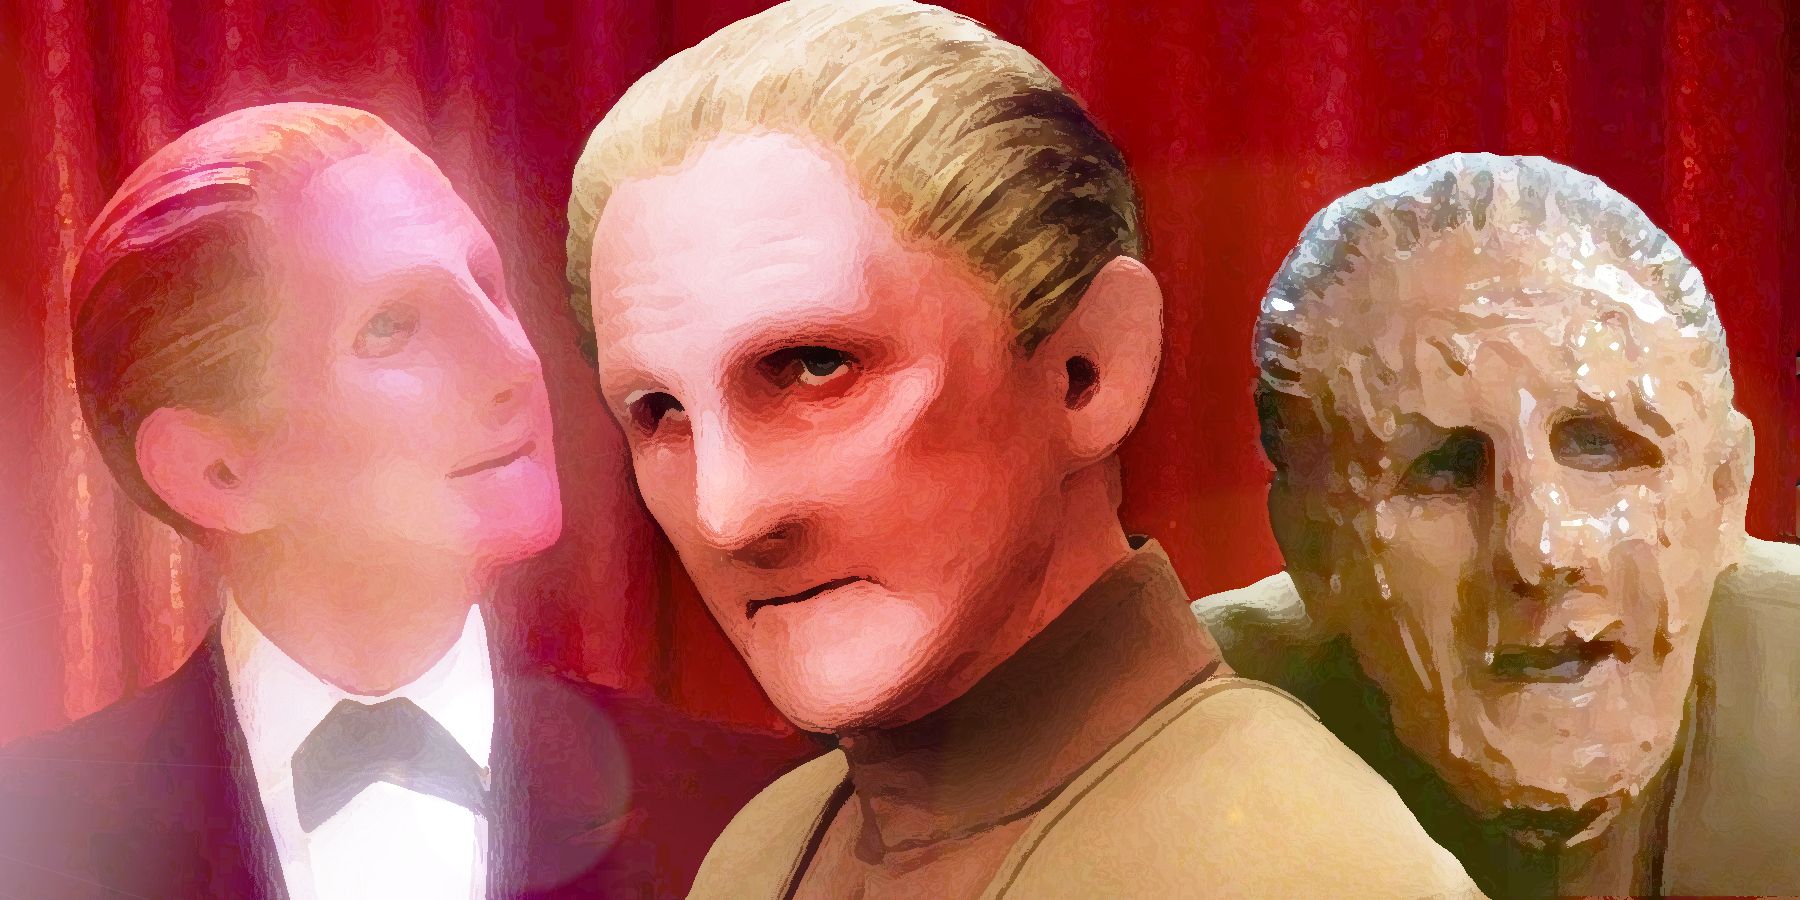 Side by side images of Odo playing a piano, Odo in his security uniform, and Odo melting